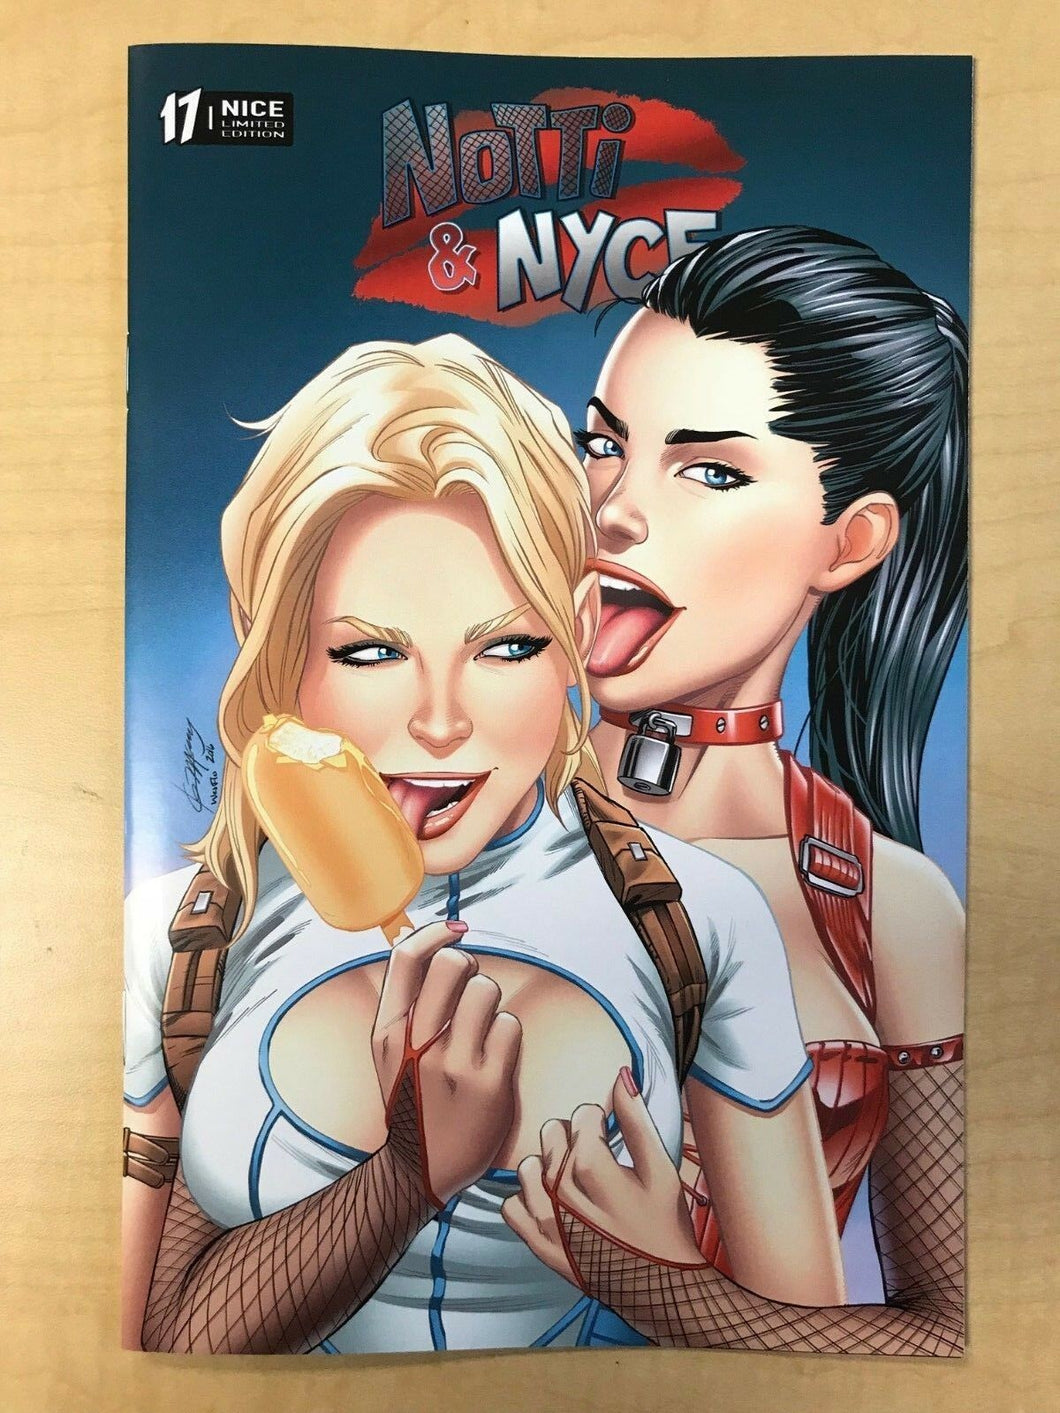 Notti & Nyce #17 C Kevin McCoy NICE Variant Cover Counterpoint Comics SOLD OUT